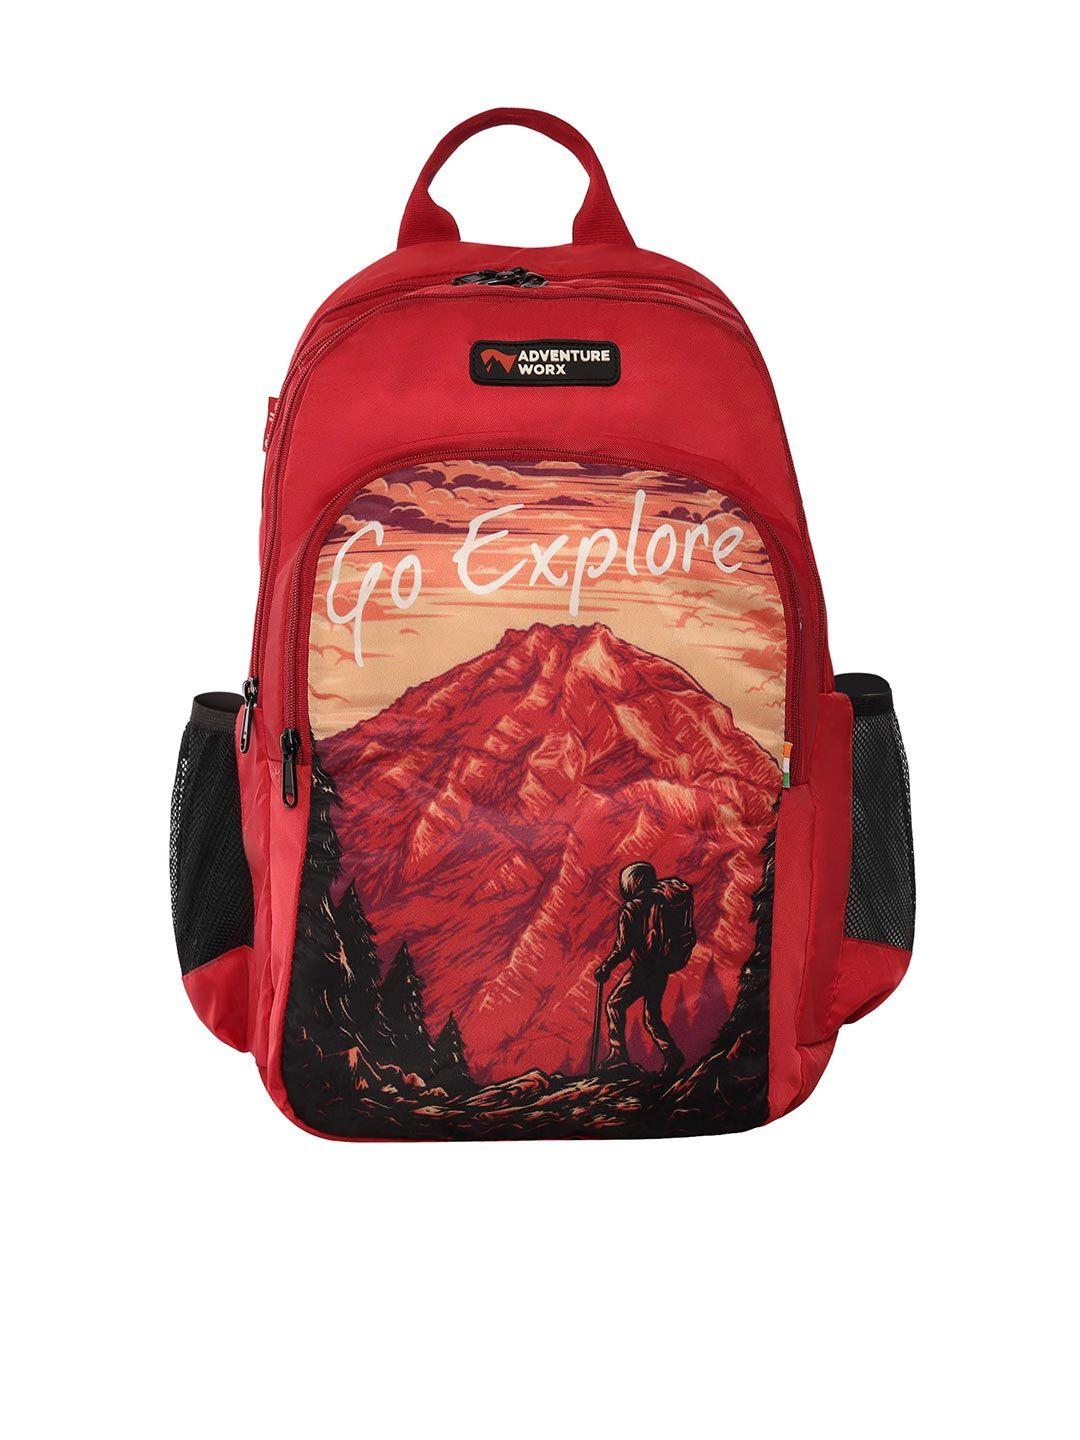 adventure worx unisex graphic backpack with compression straps